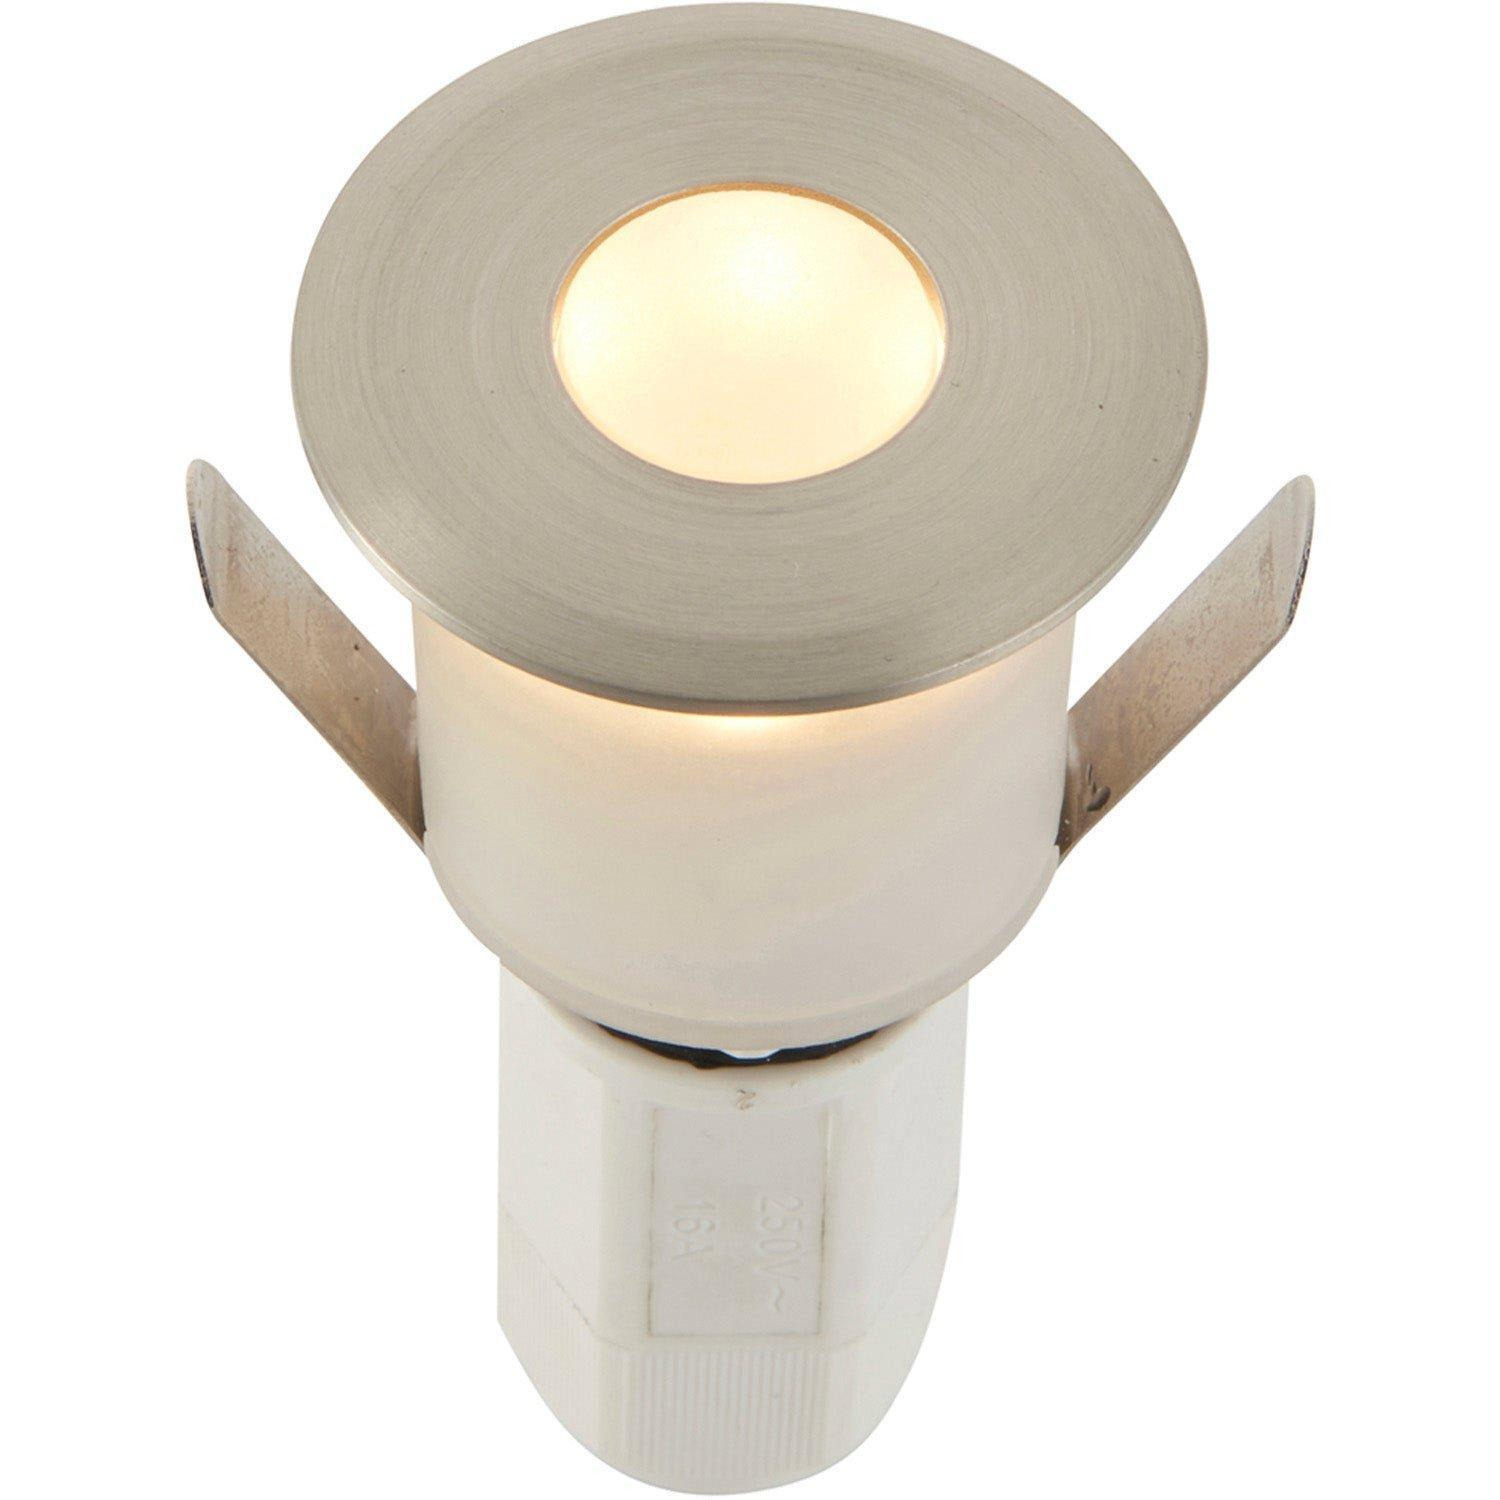 Recessed Decking IP67 Guide Light - 1.2W Warm White LED - Satin Nickel Plate - image 1